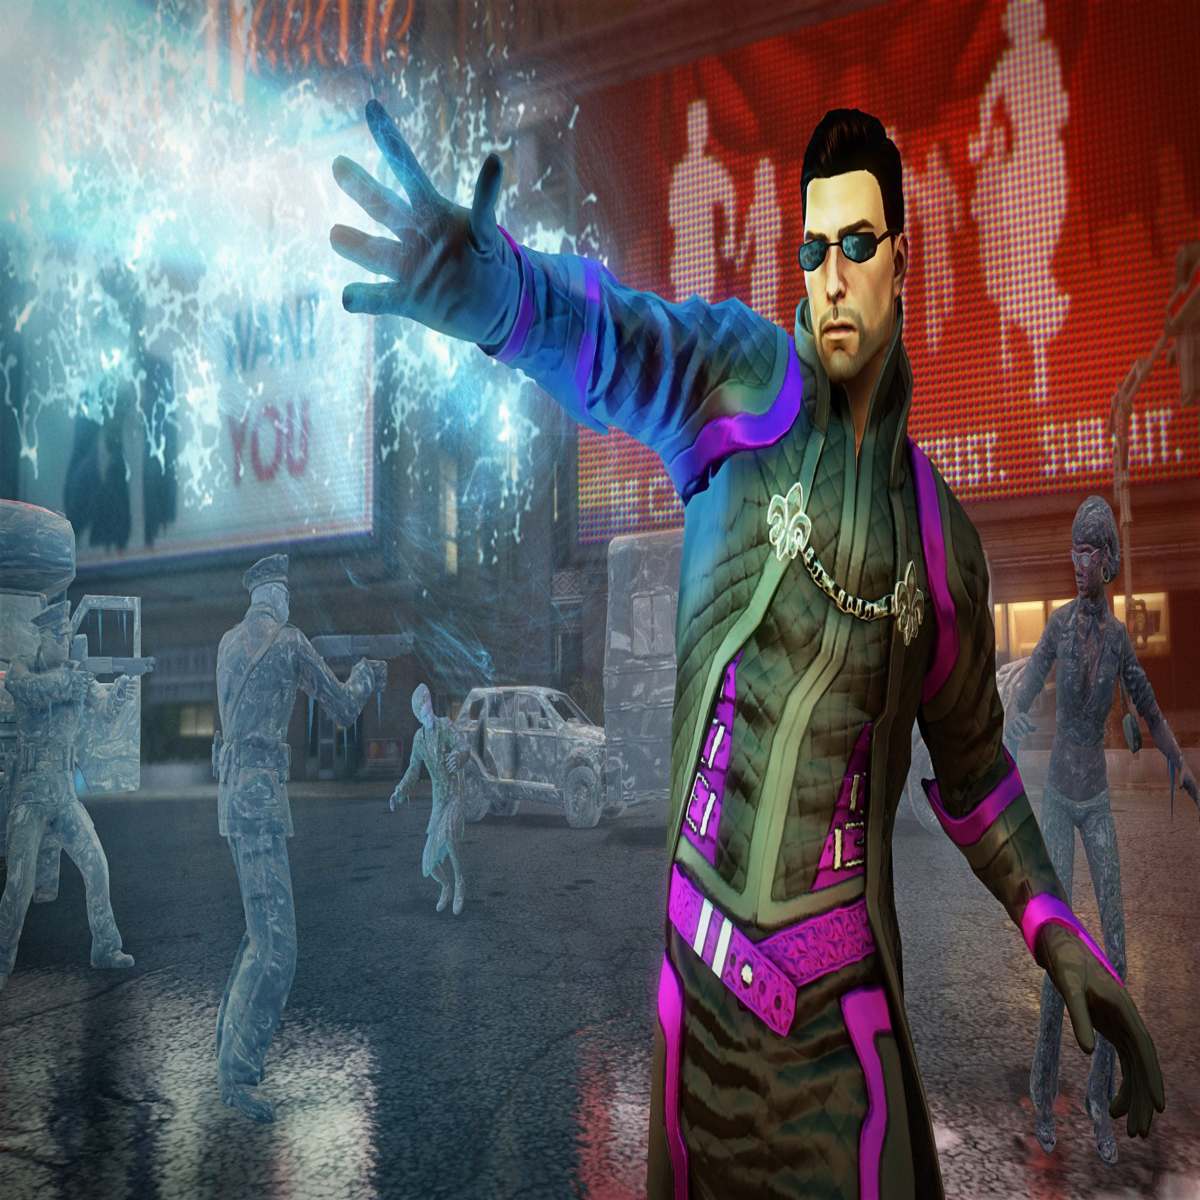 Saints Row Review - A Disappointing Return 